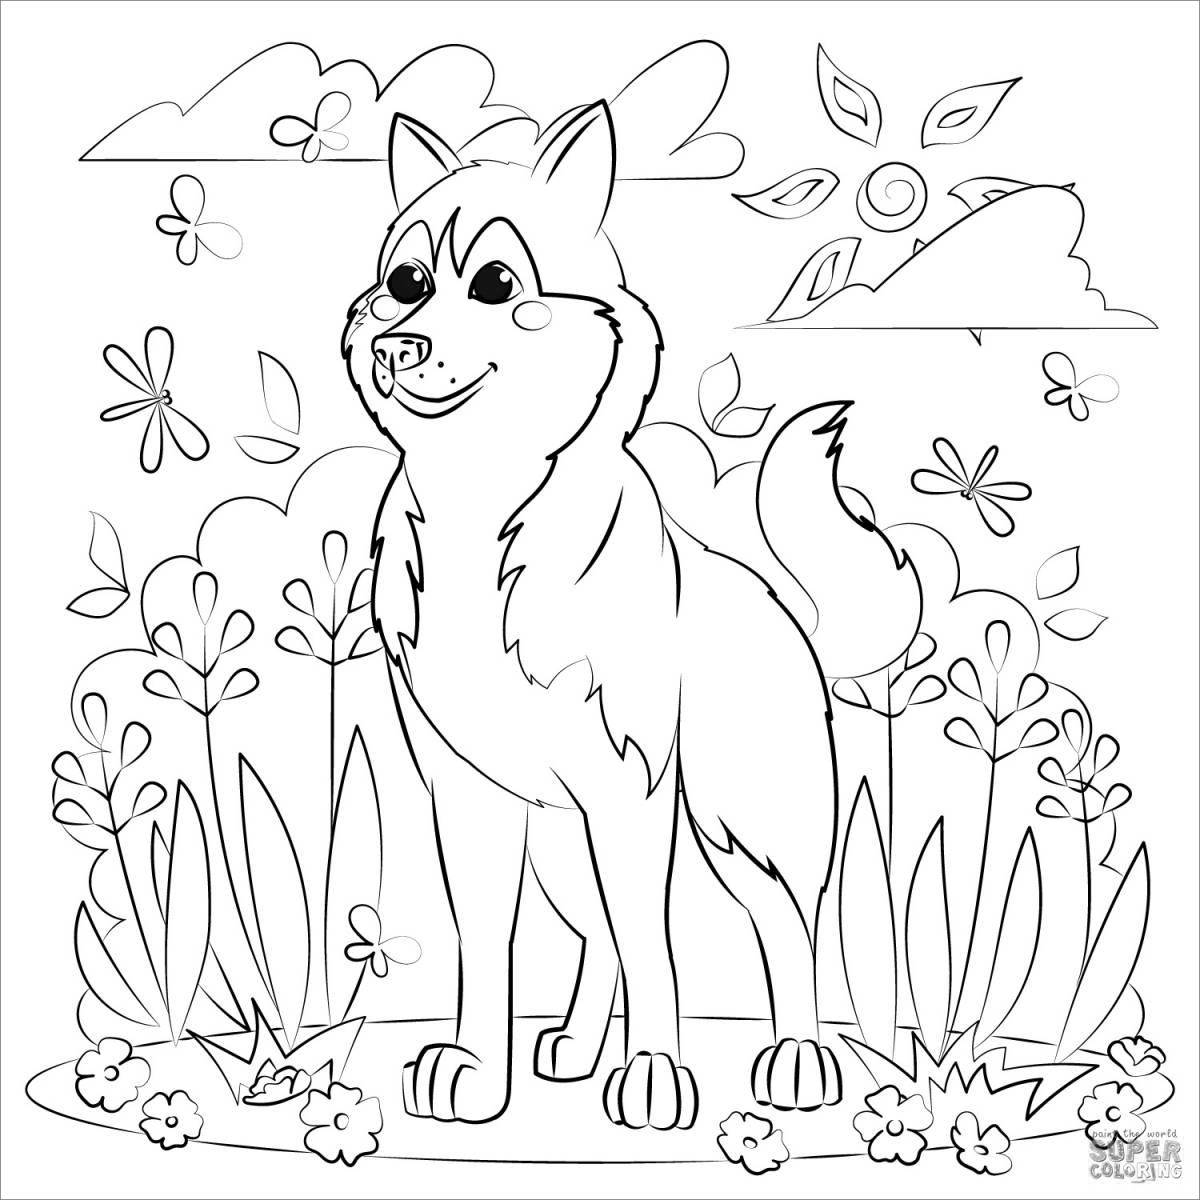 Colorful husky coloring book for kids